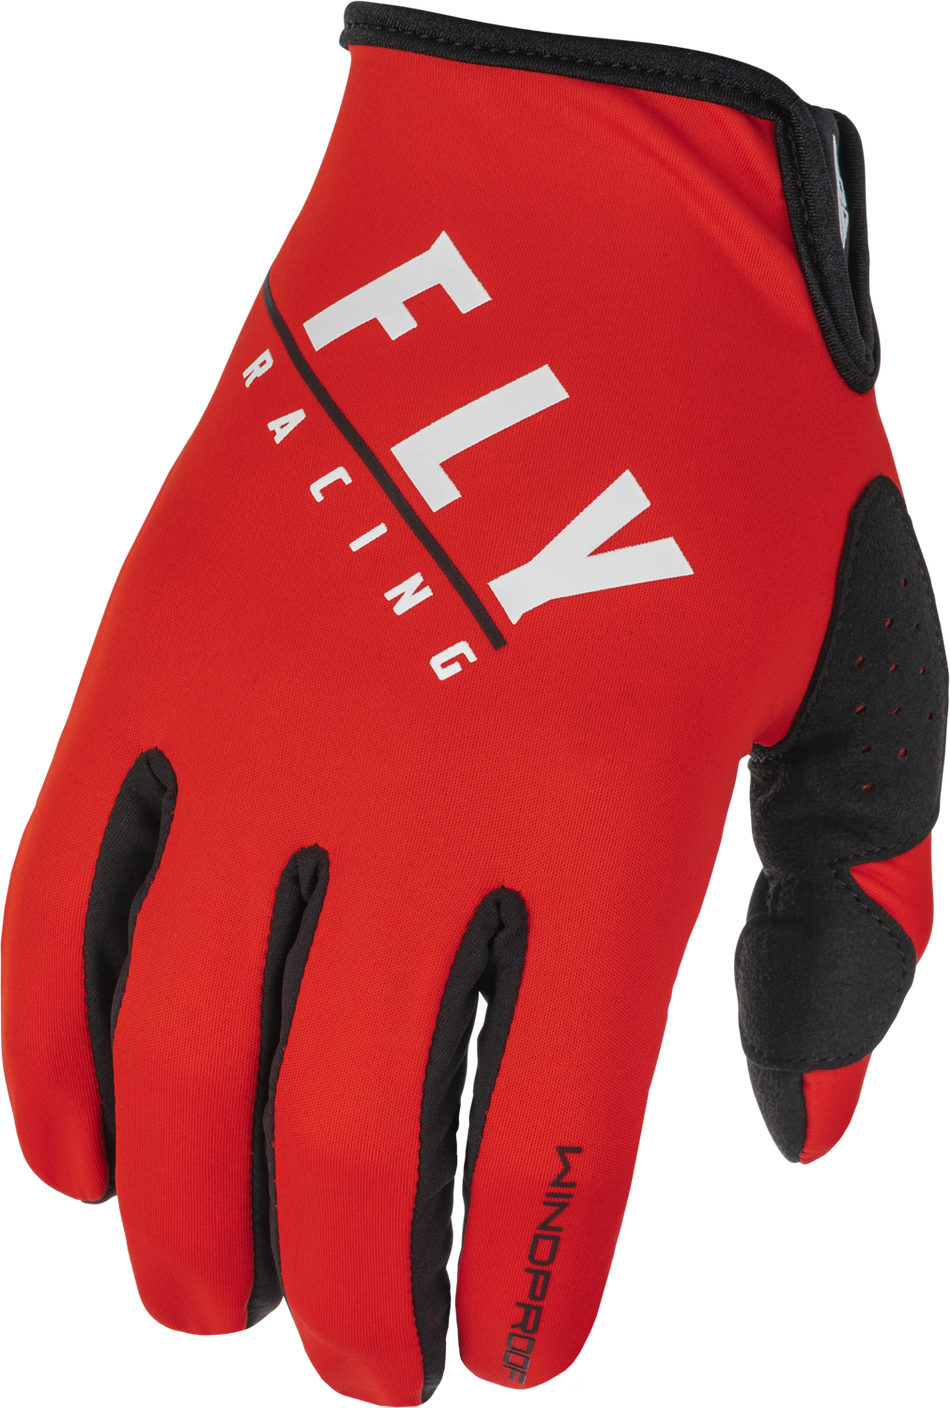 FLY RACING Windproof Gloves Black/Red Sz 12 371-14312